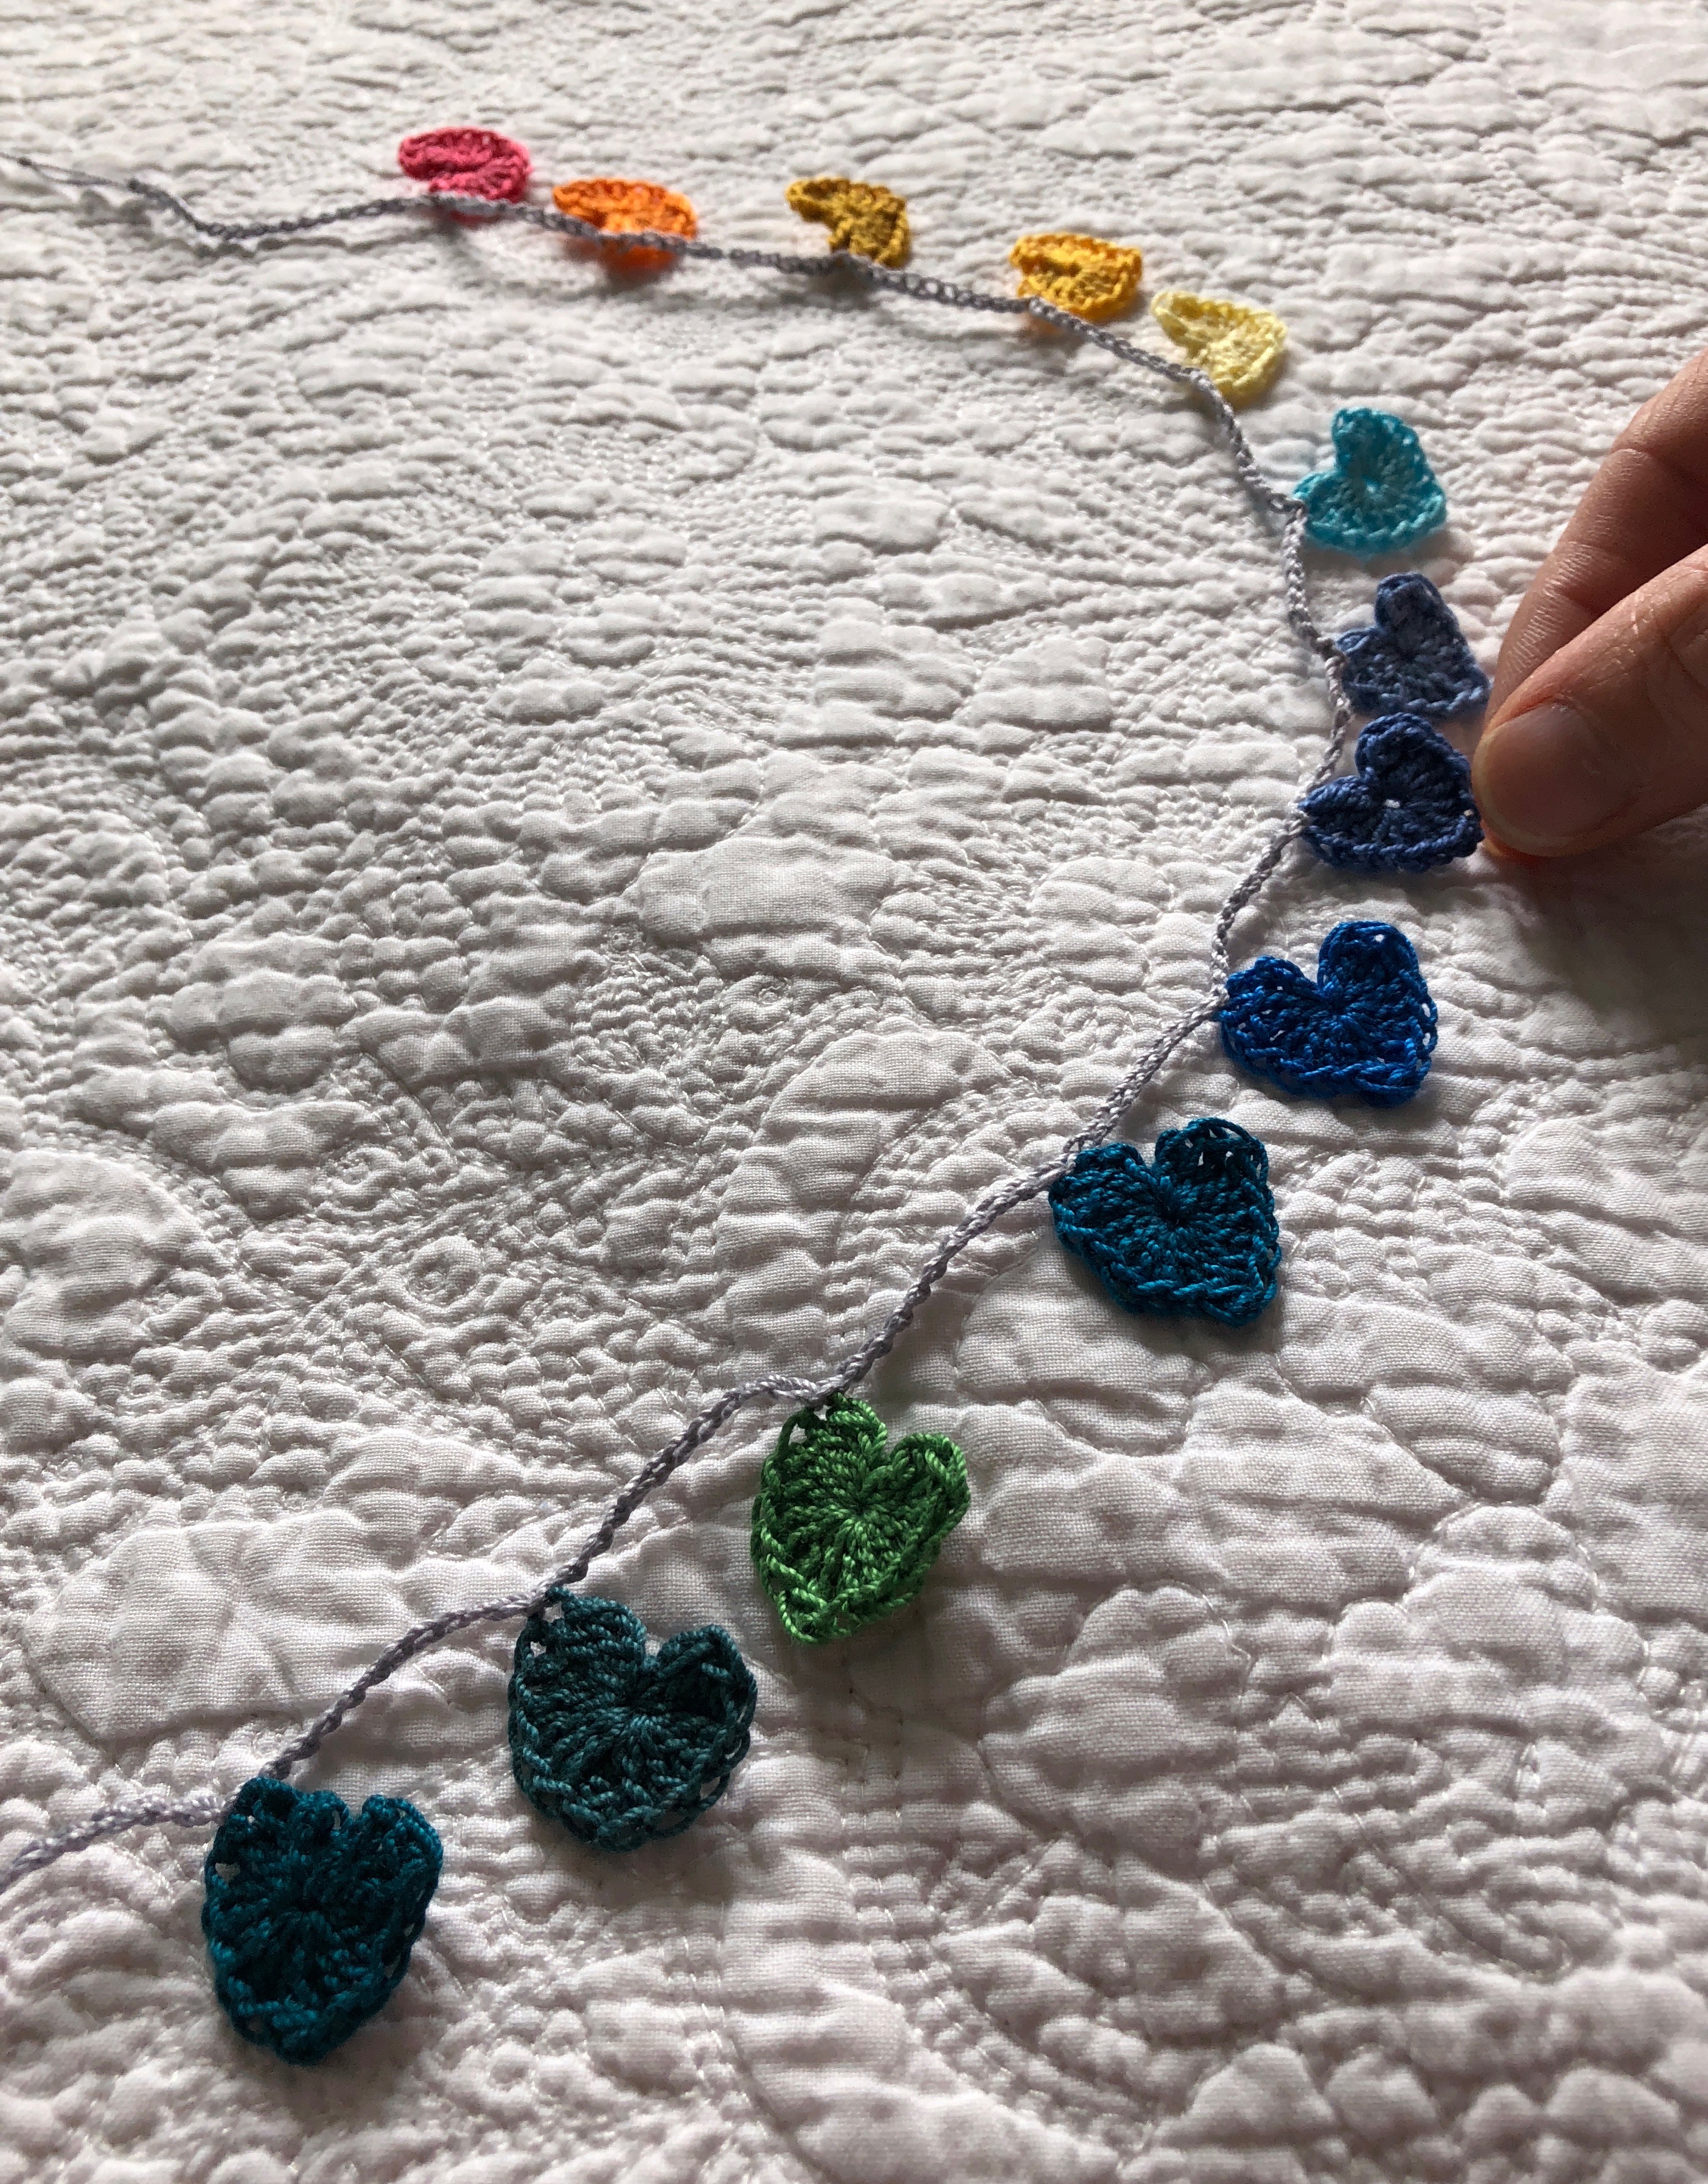 Tiny cotton crocheted hearts garland in a rainbow of colours grading from petrol blue through to pink.